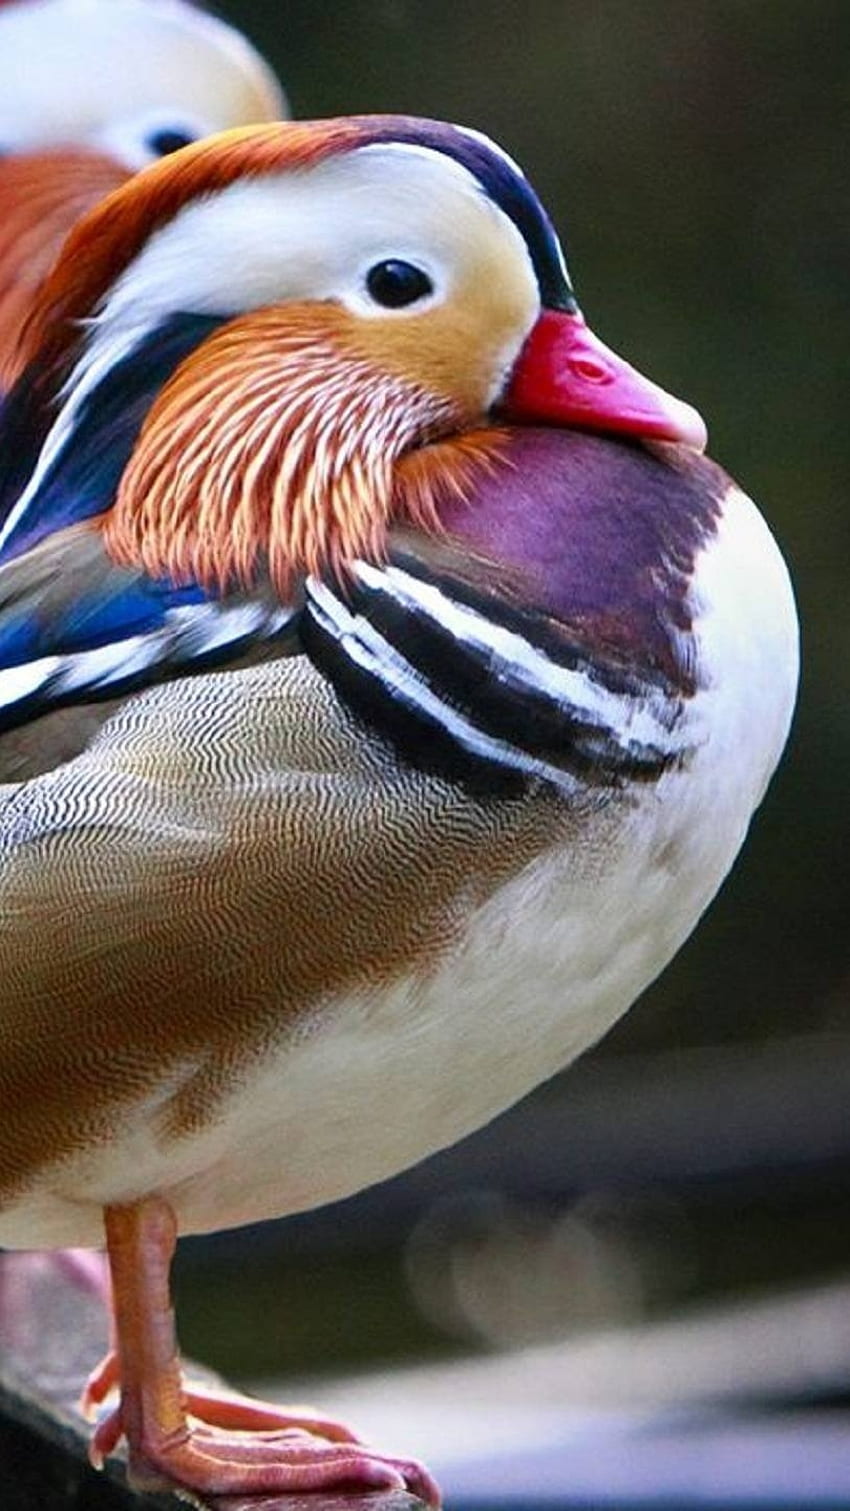 Meaning and Uses of Mandarin Duck Symbols in Feng Shui